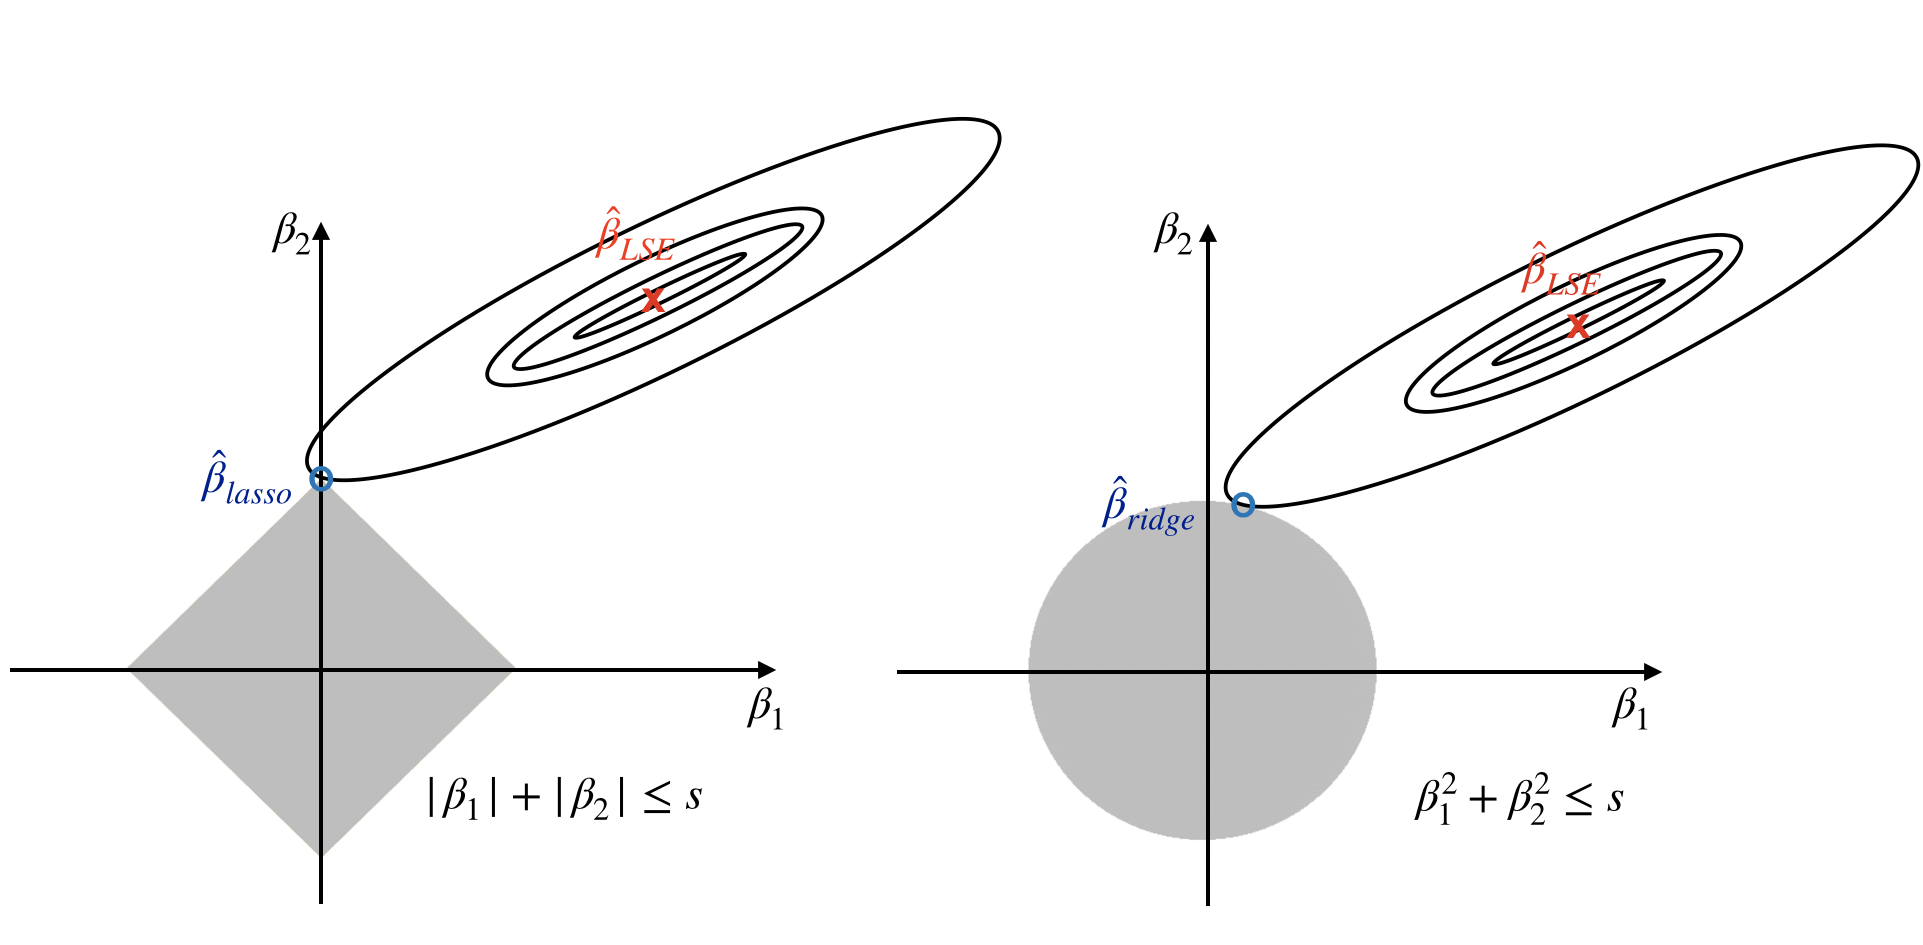 Contours of the RSS and constrain functions for the lasso (left) and ridge regression (right)